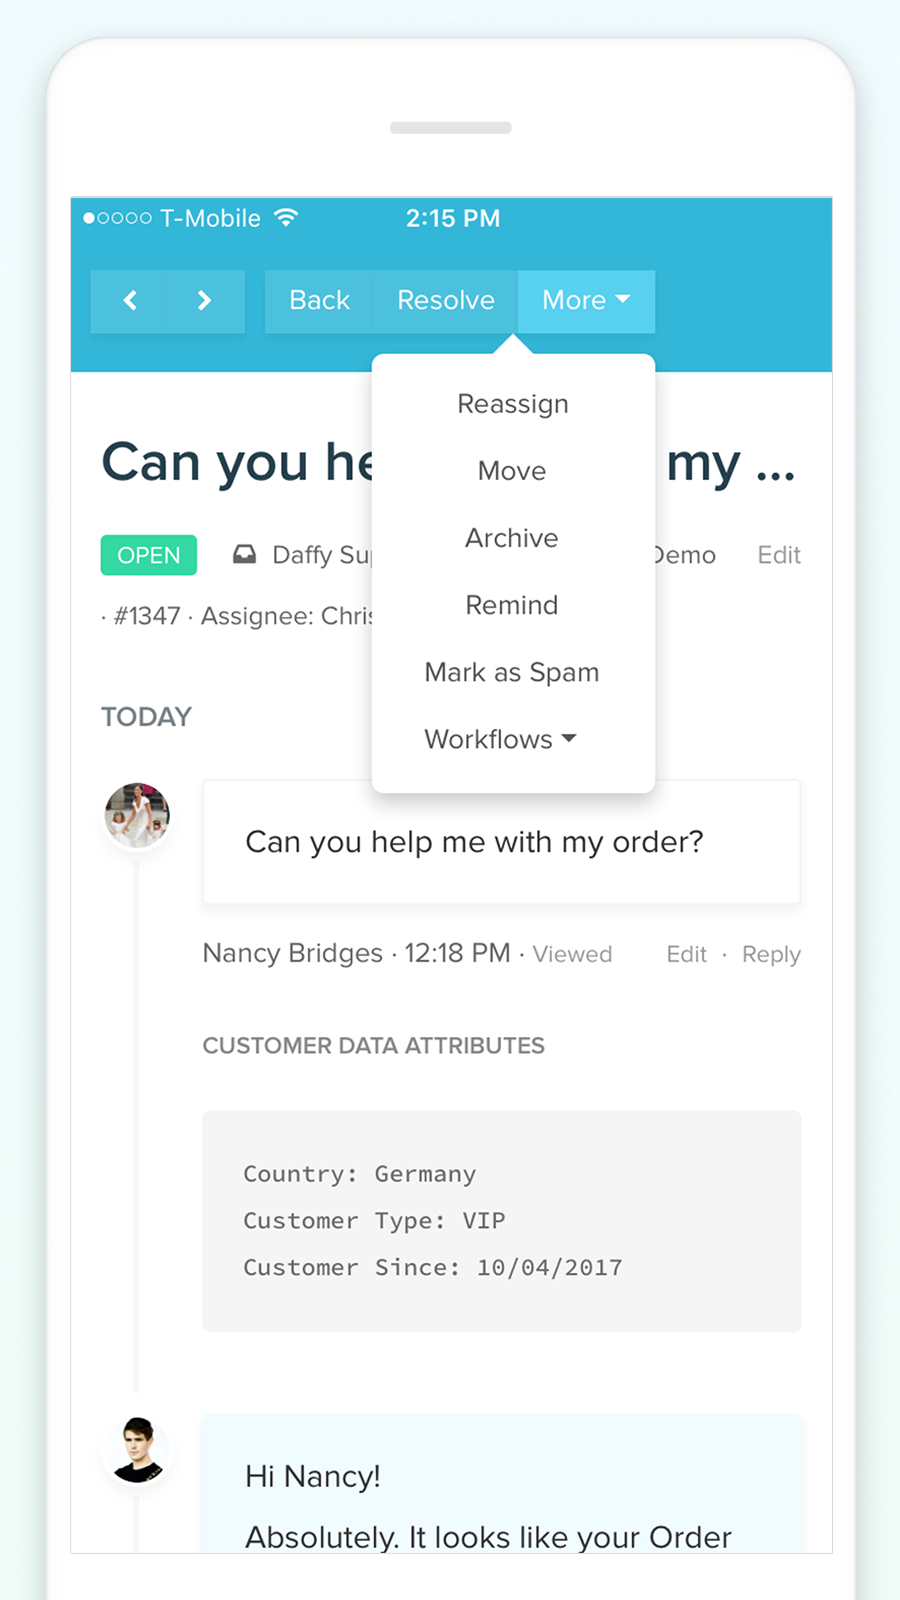 Manage conversations and teams through the mobile app.